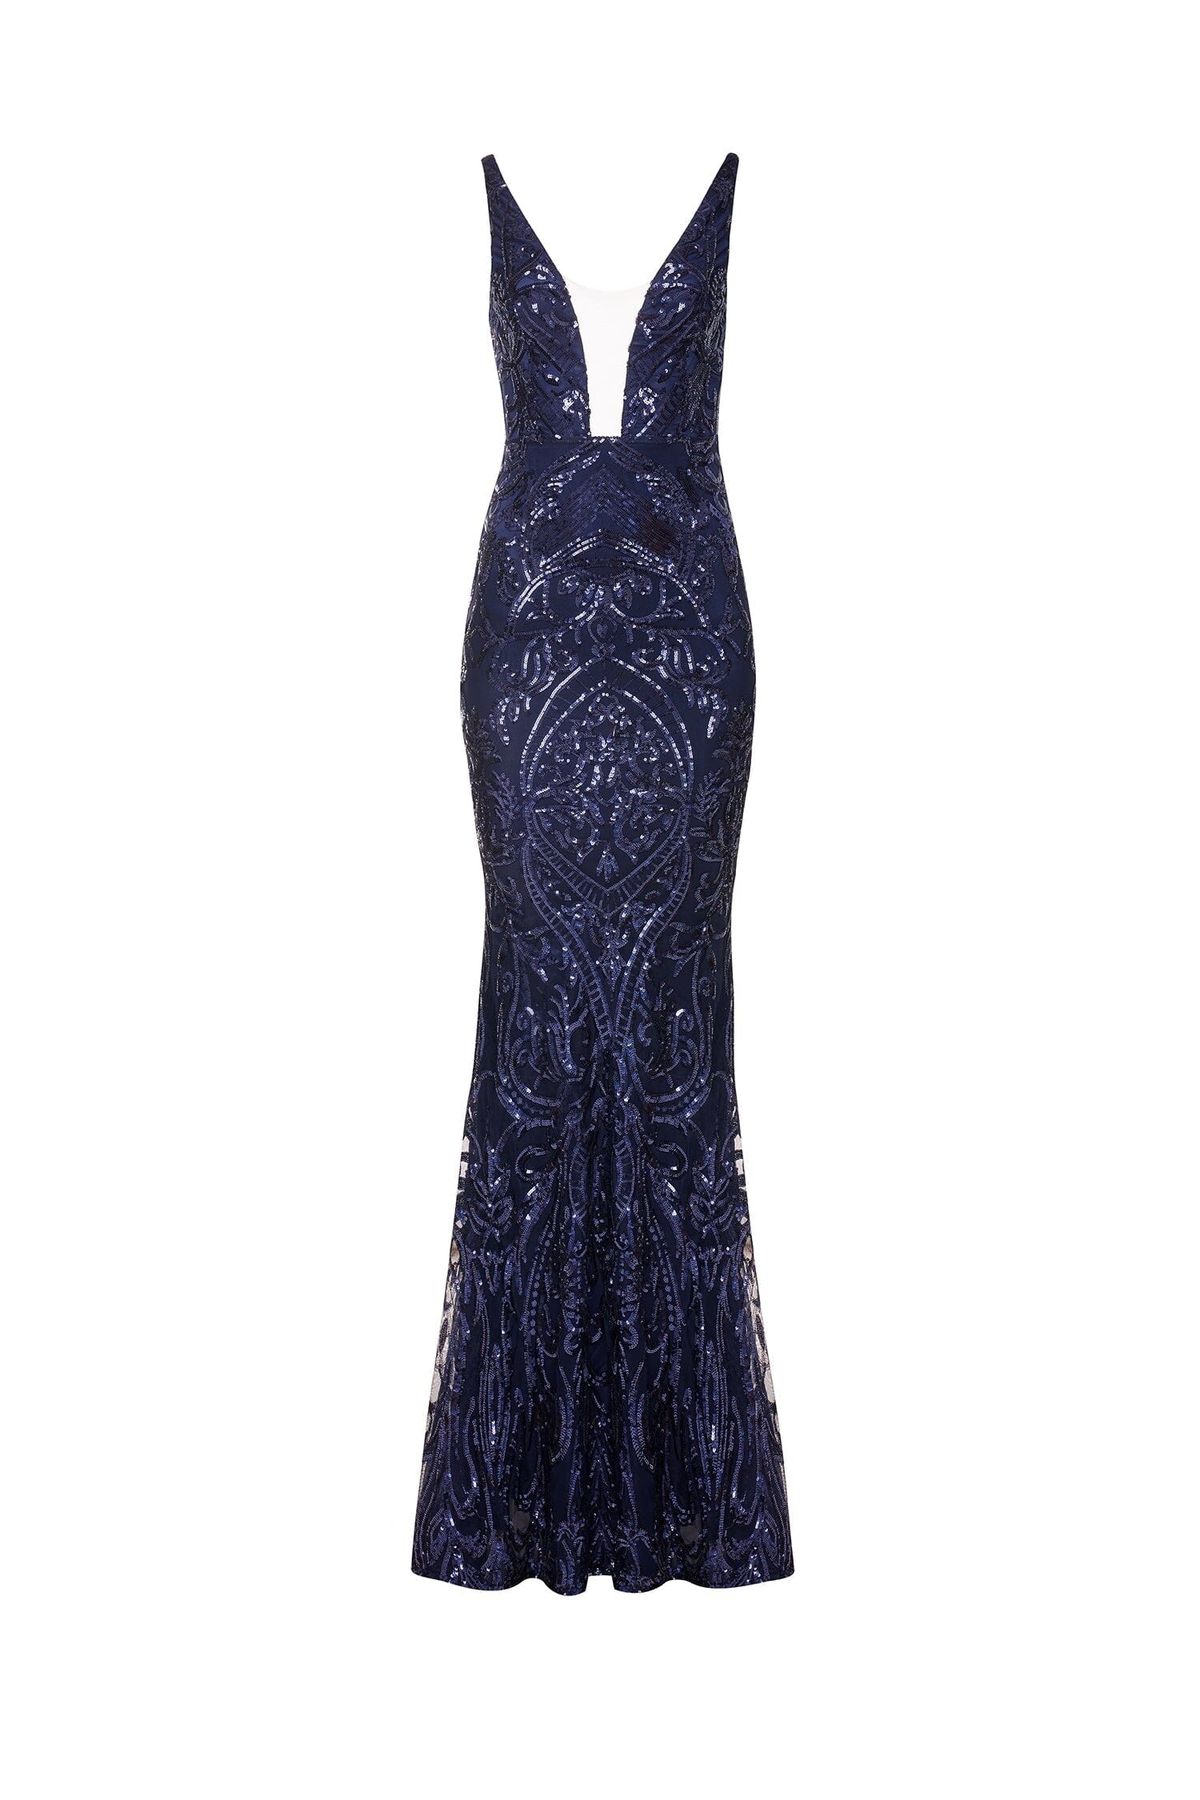 Style Salma Alamour The Label Size M Prom Plunge Sheer Navy Blue Mermaid Dress on Queenly